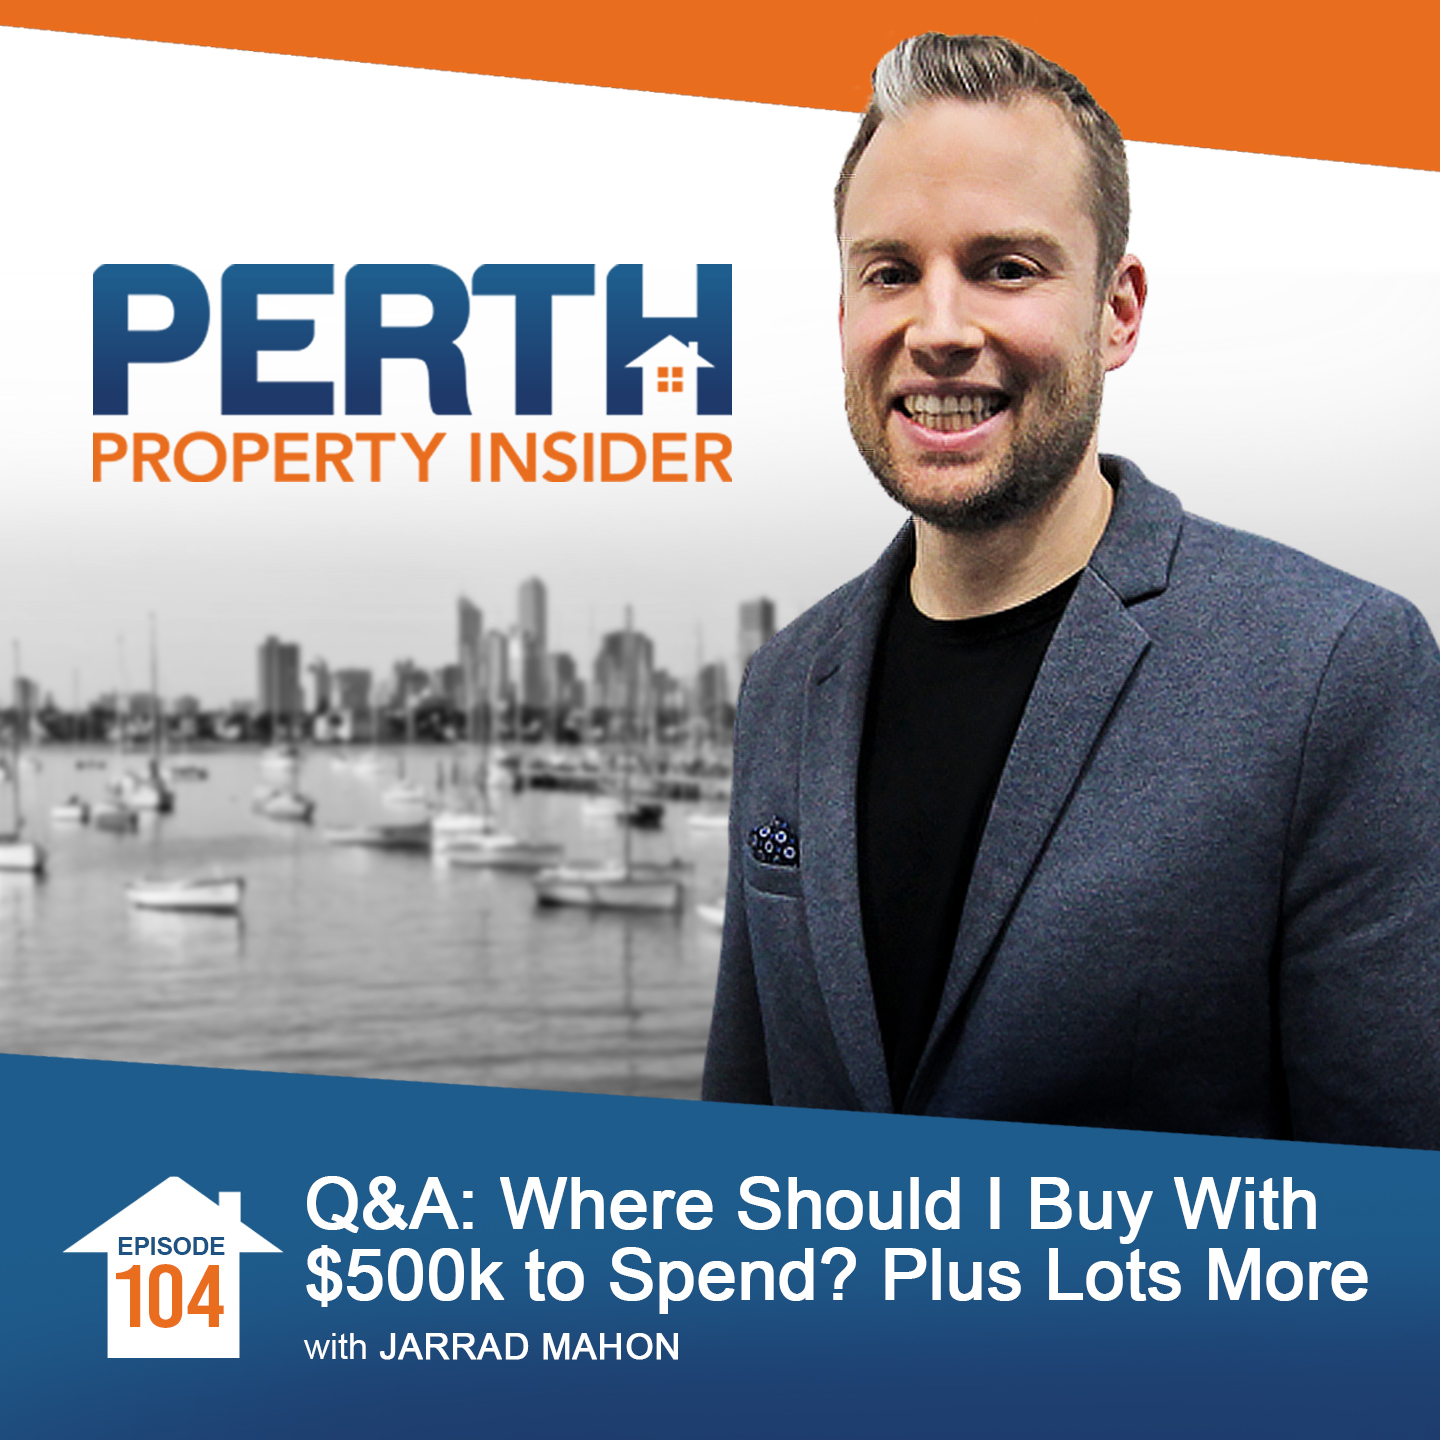 Q&A: Where Should I Buy With $500k to Spend? Plus Lots More